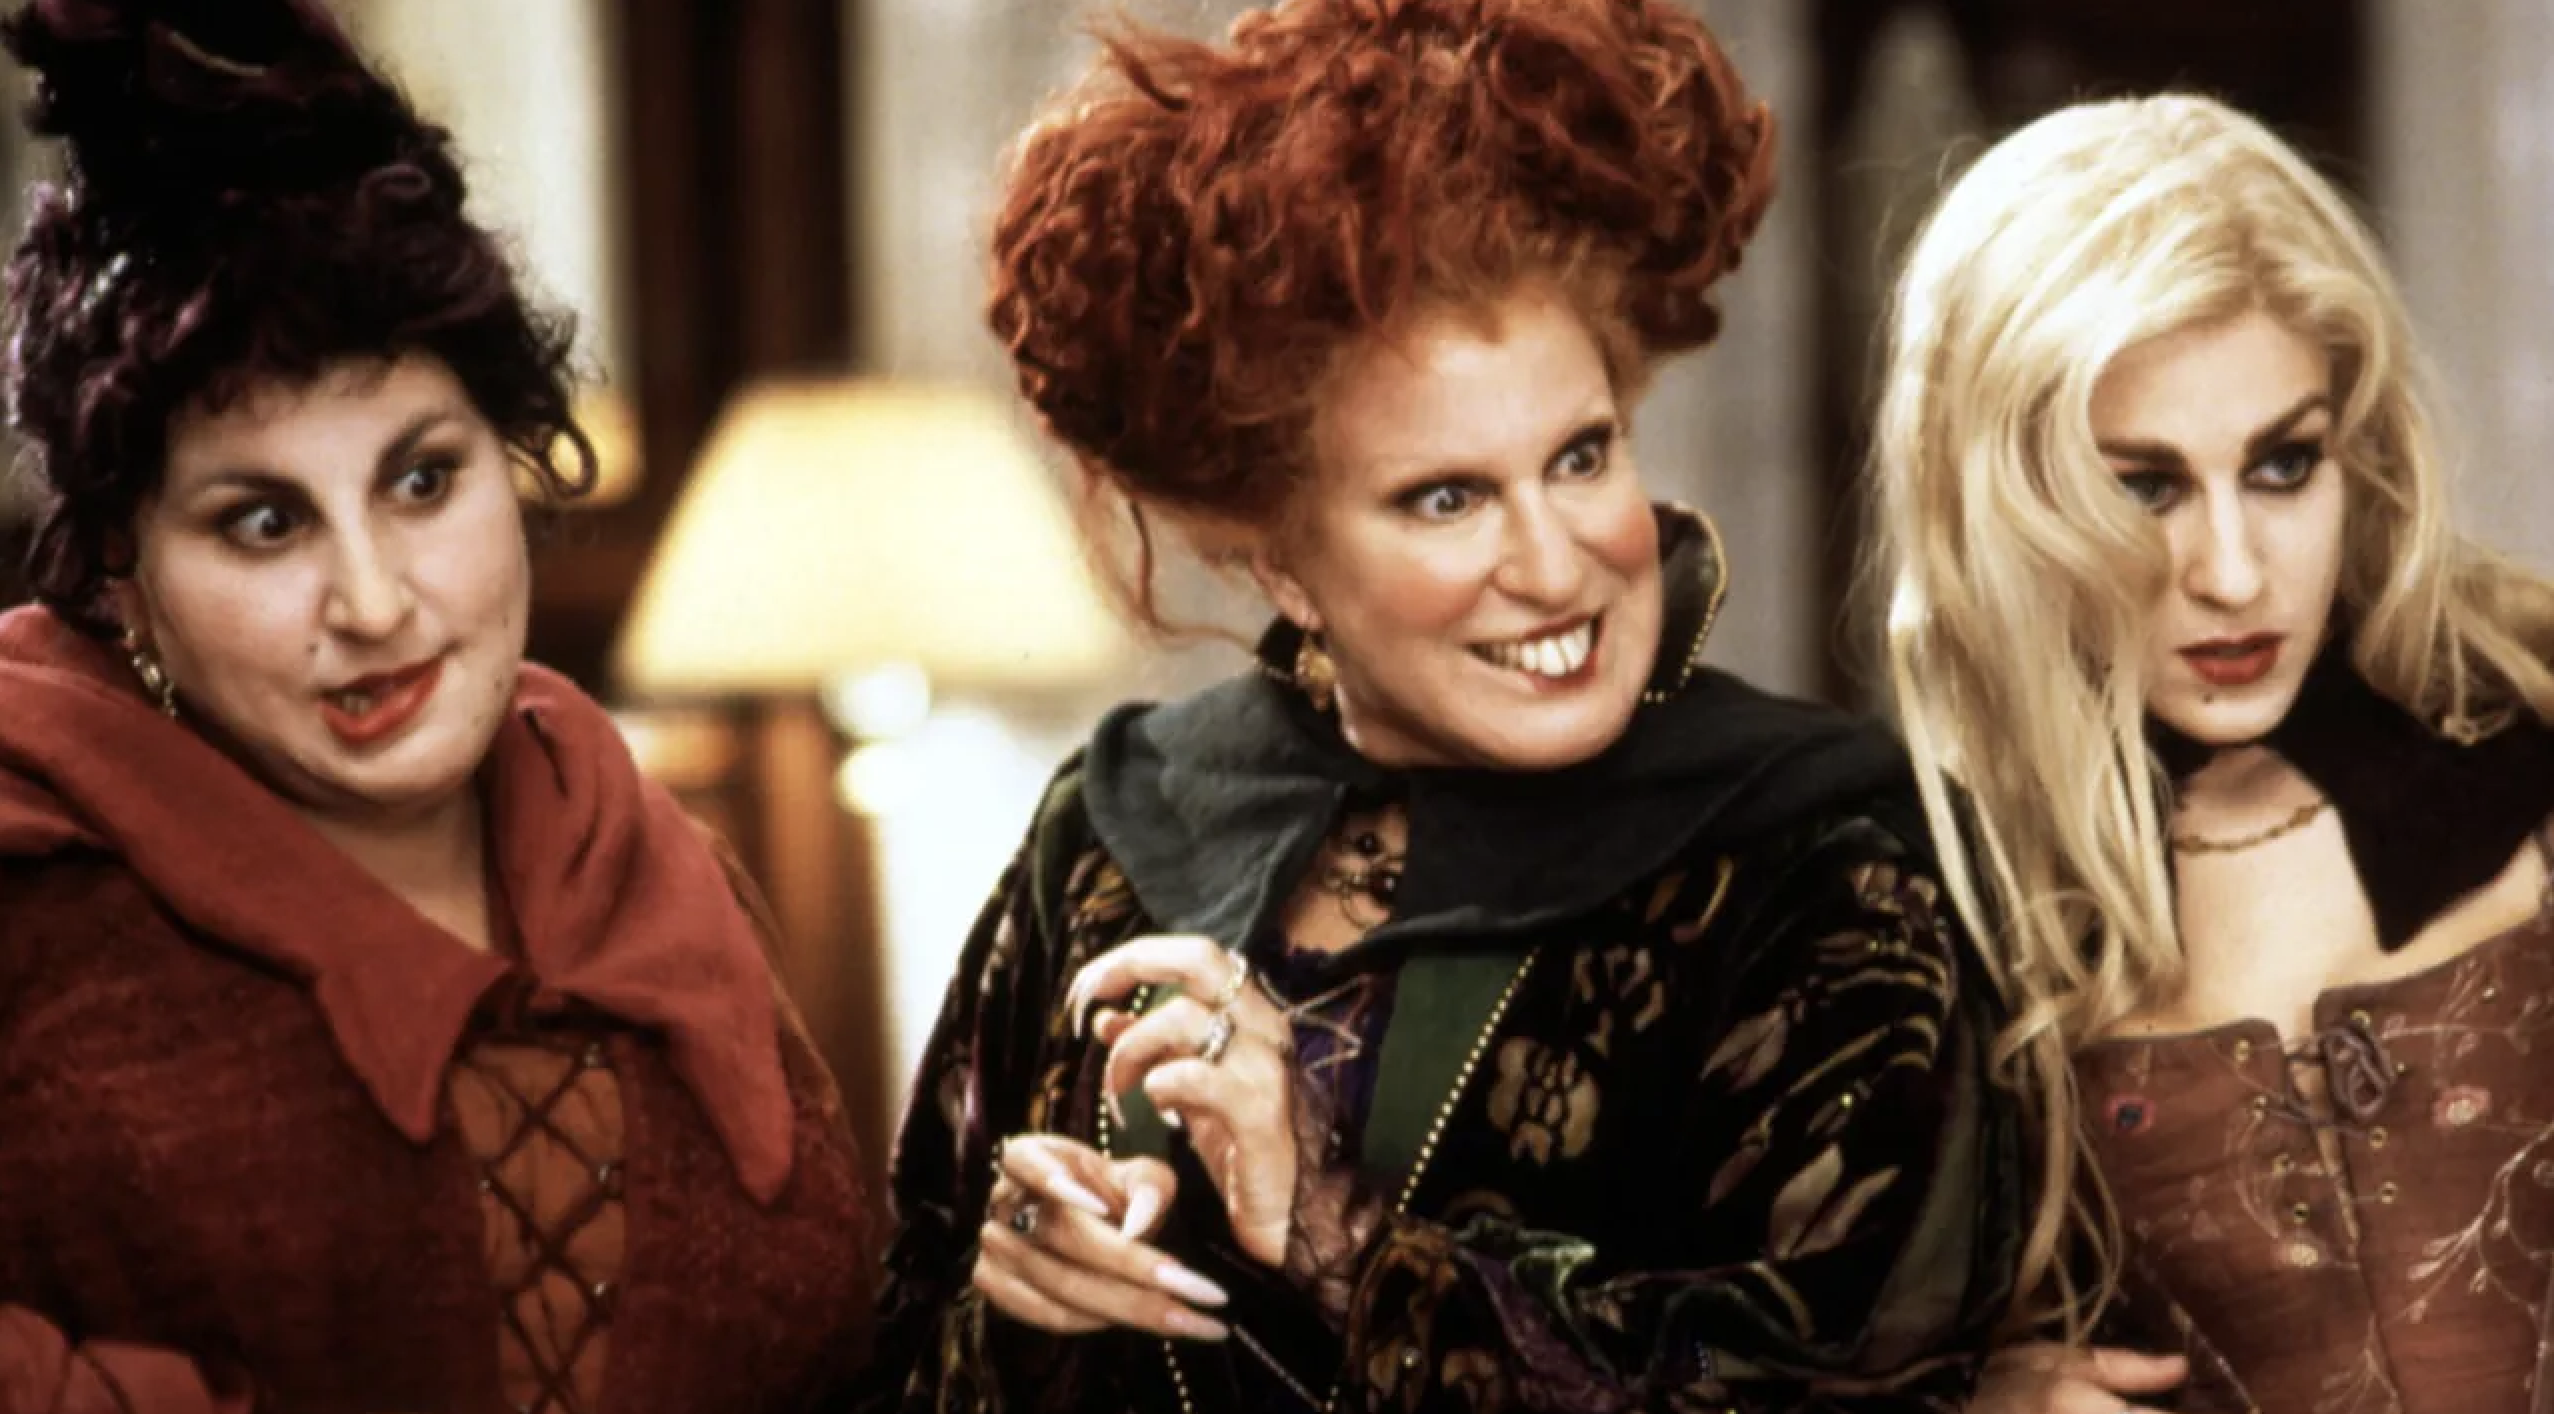 'Hocus Pocus 2' May Be Getting a New Director Due to Production Delays